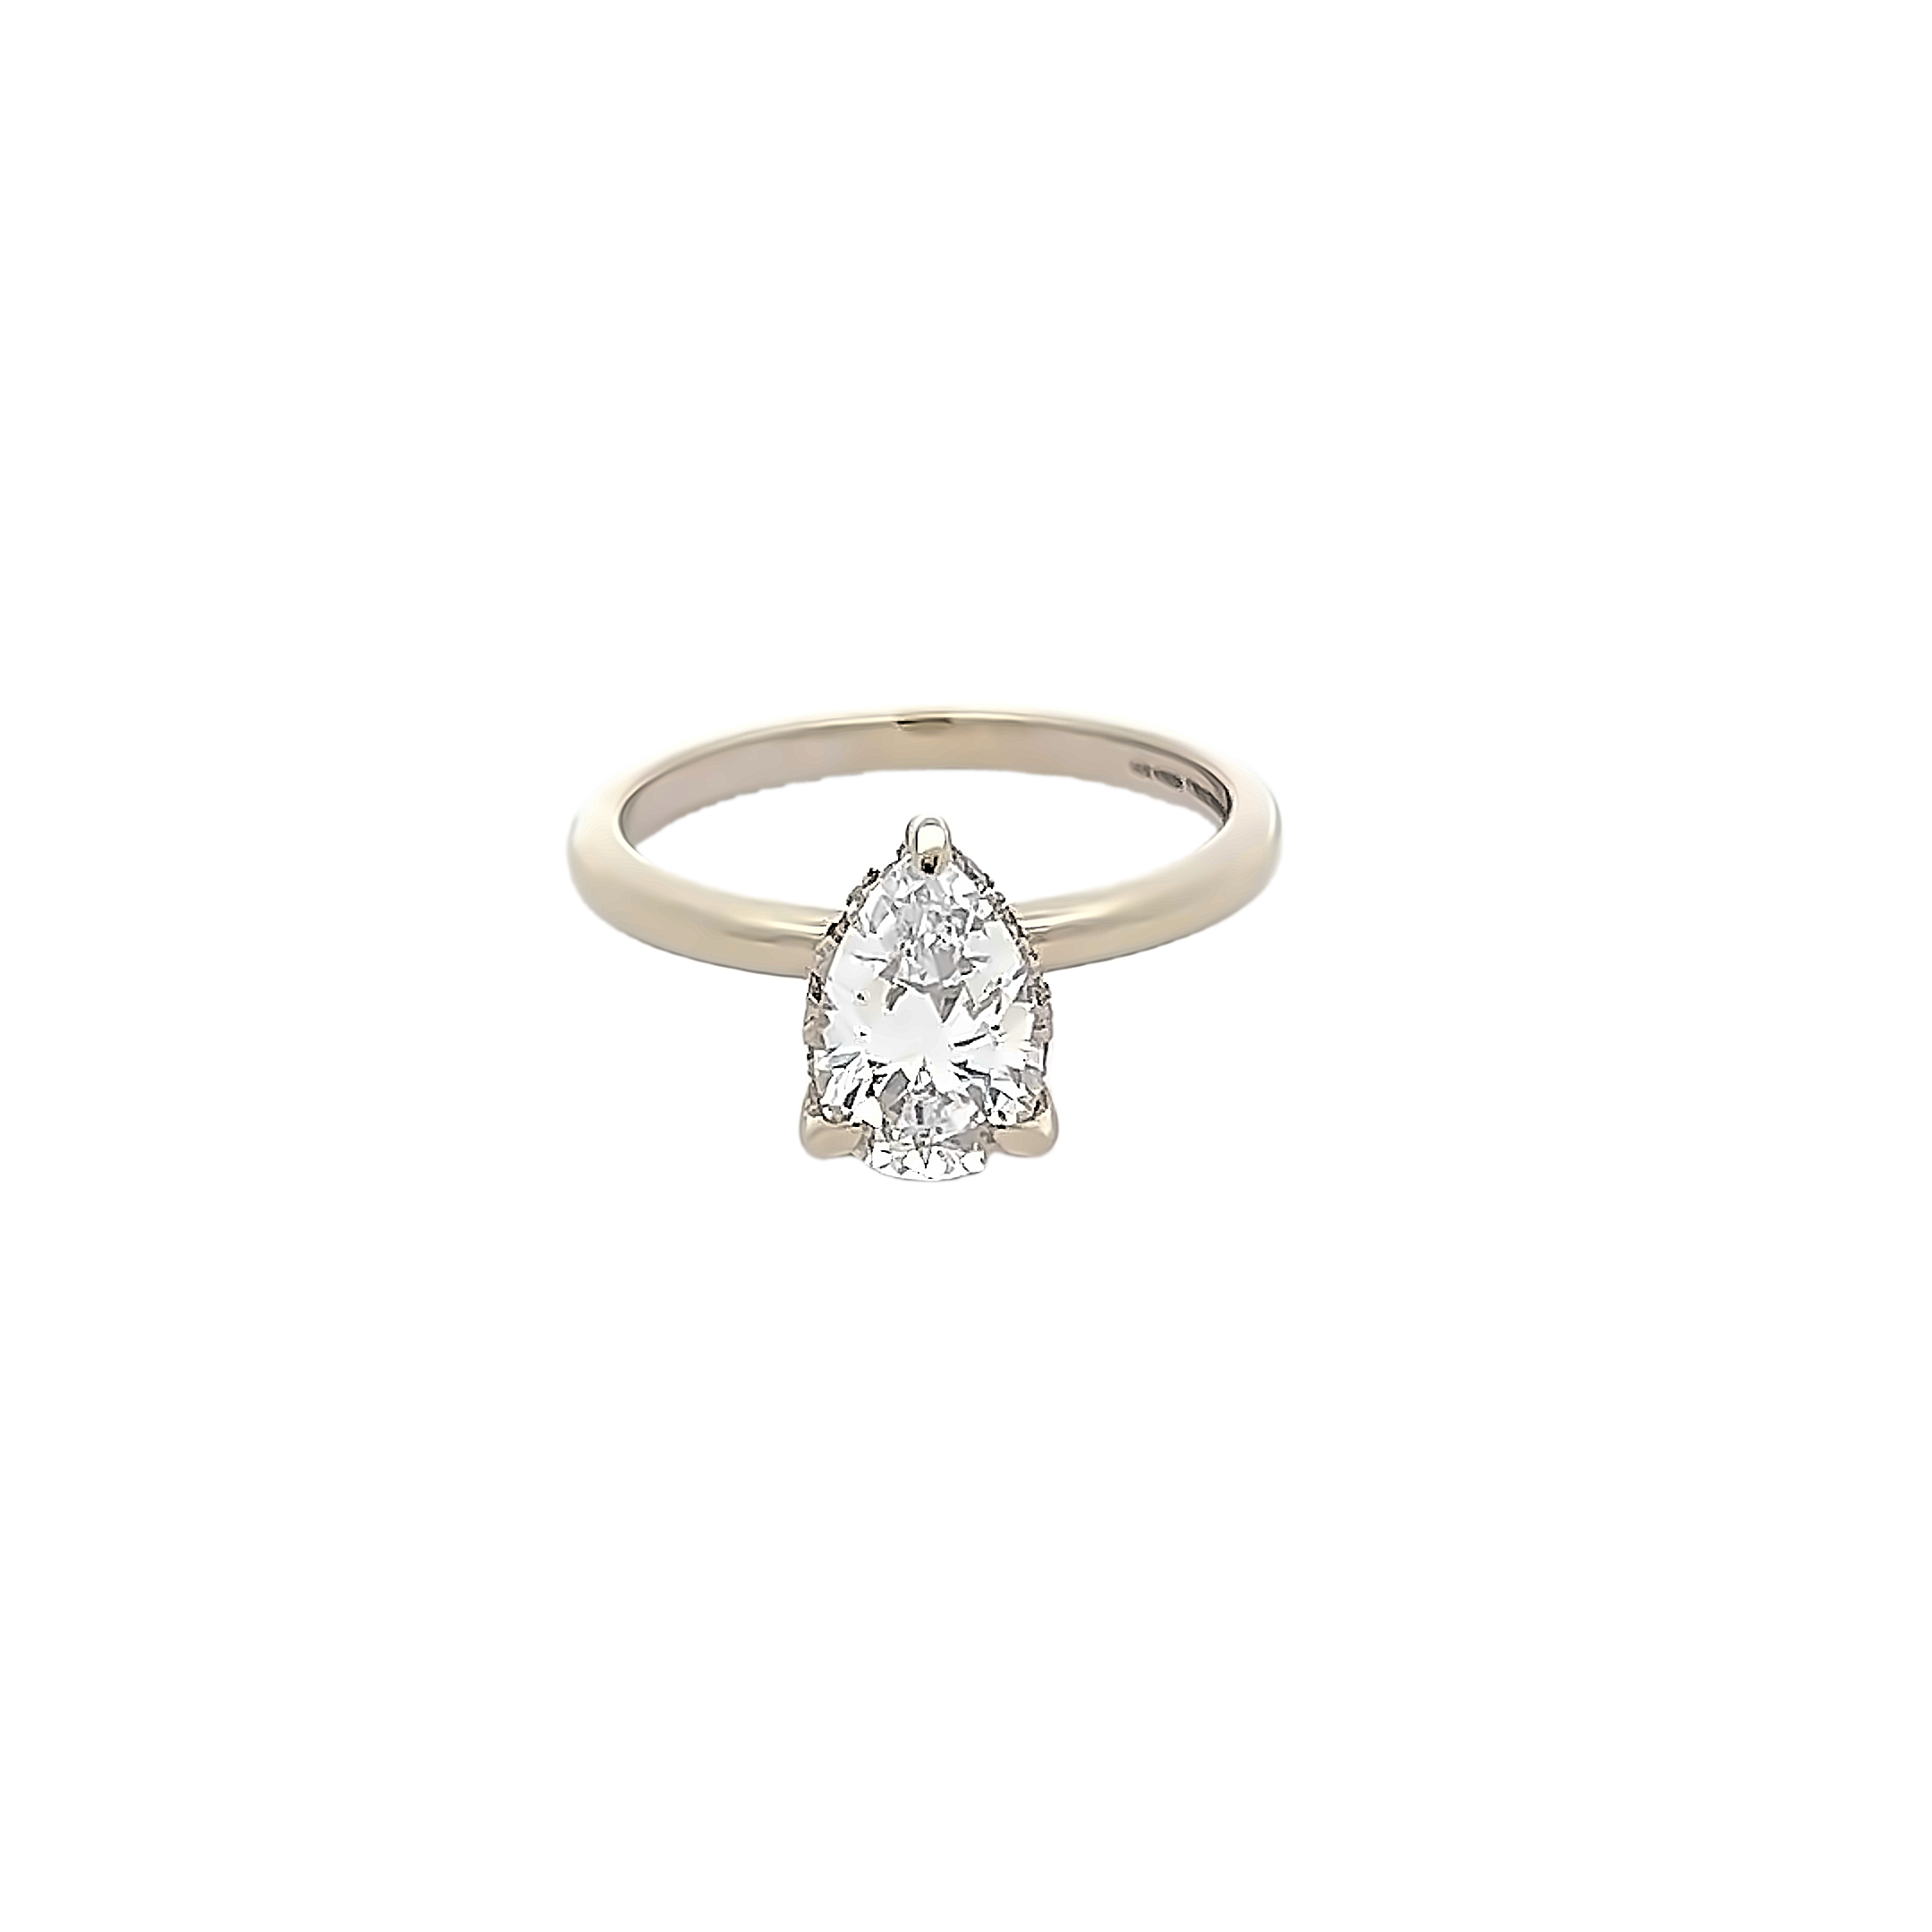 14k White Gold Solitaire Semi-mount With Hidden Halo